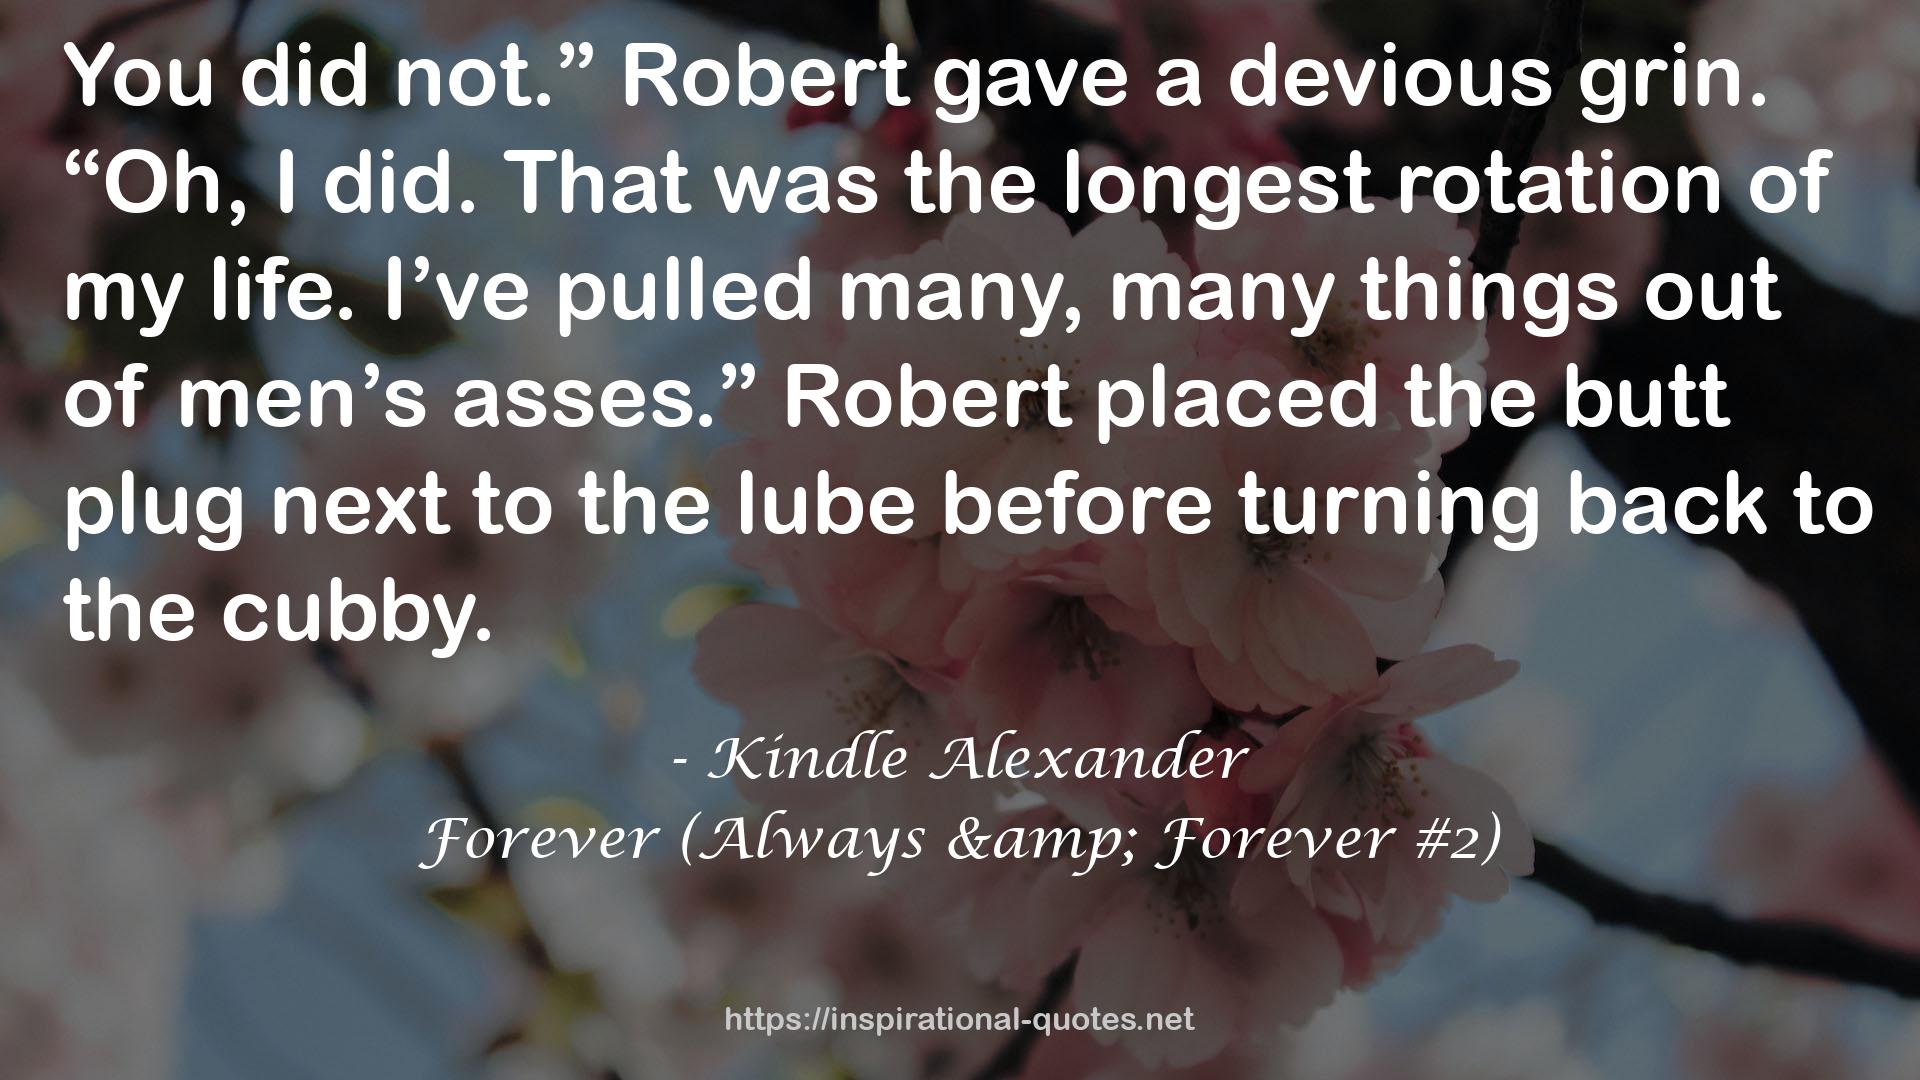 Forever (Always & Forever #2) QUOTES